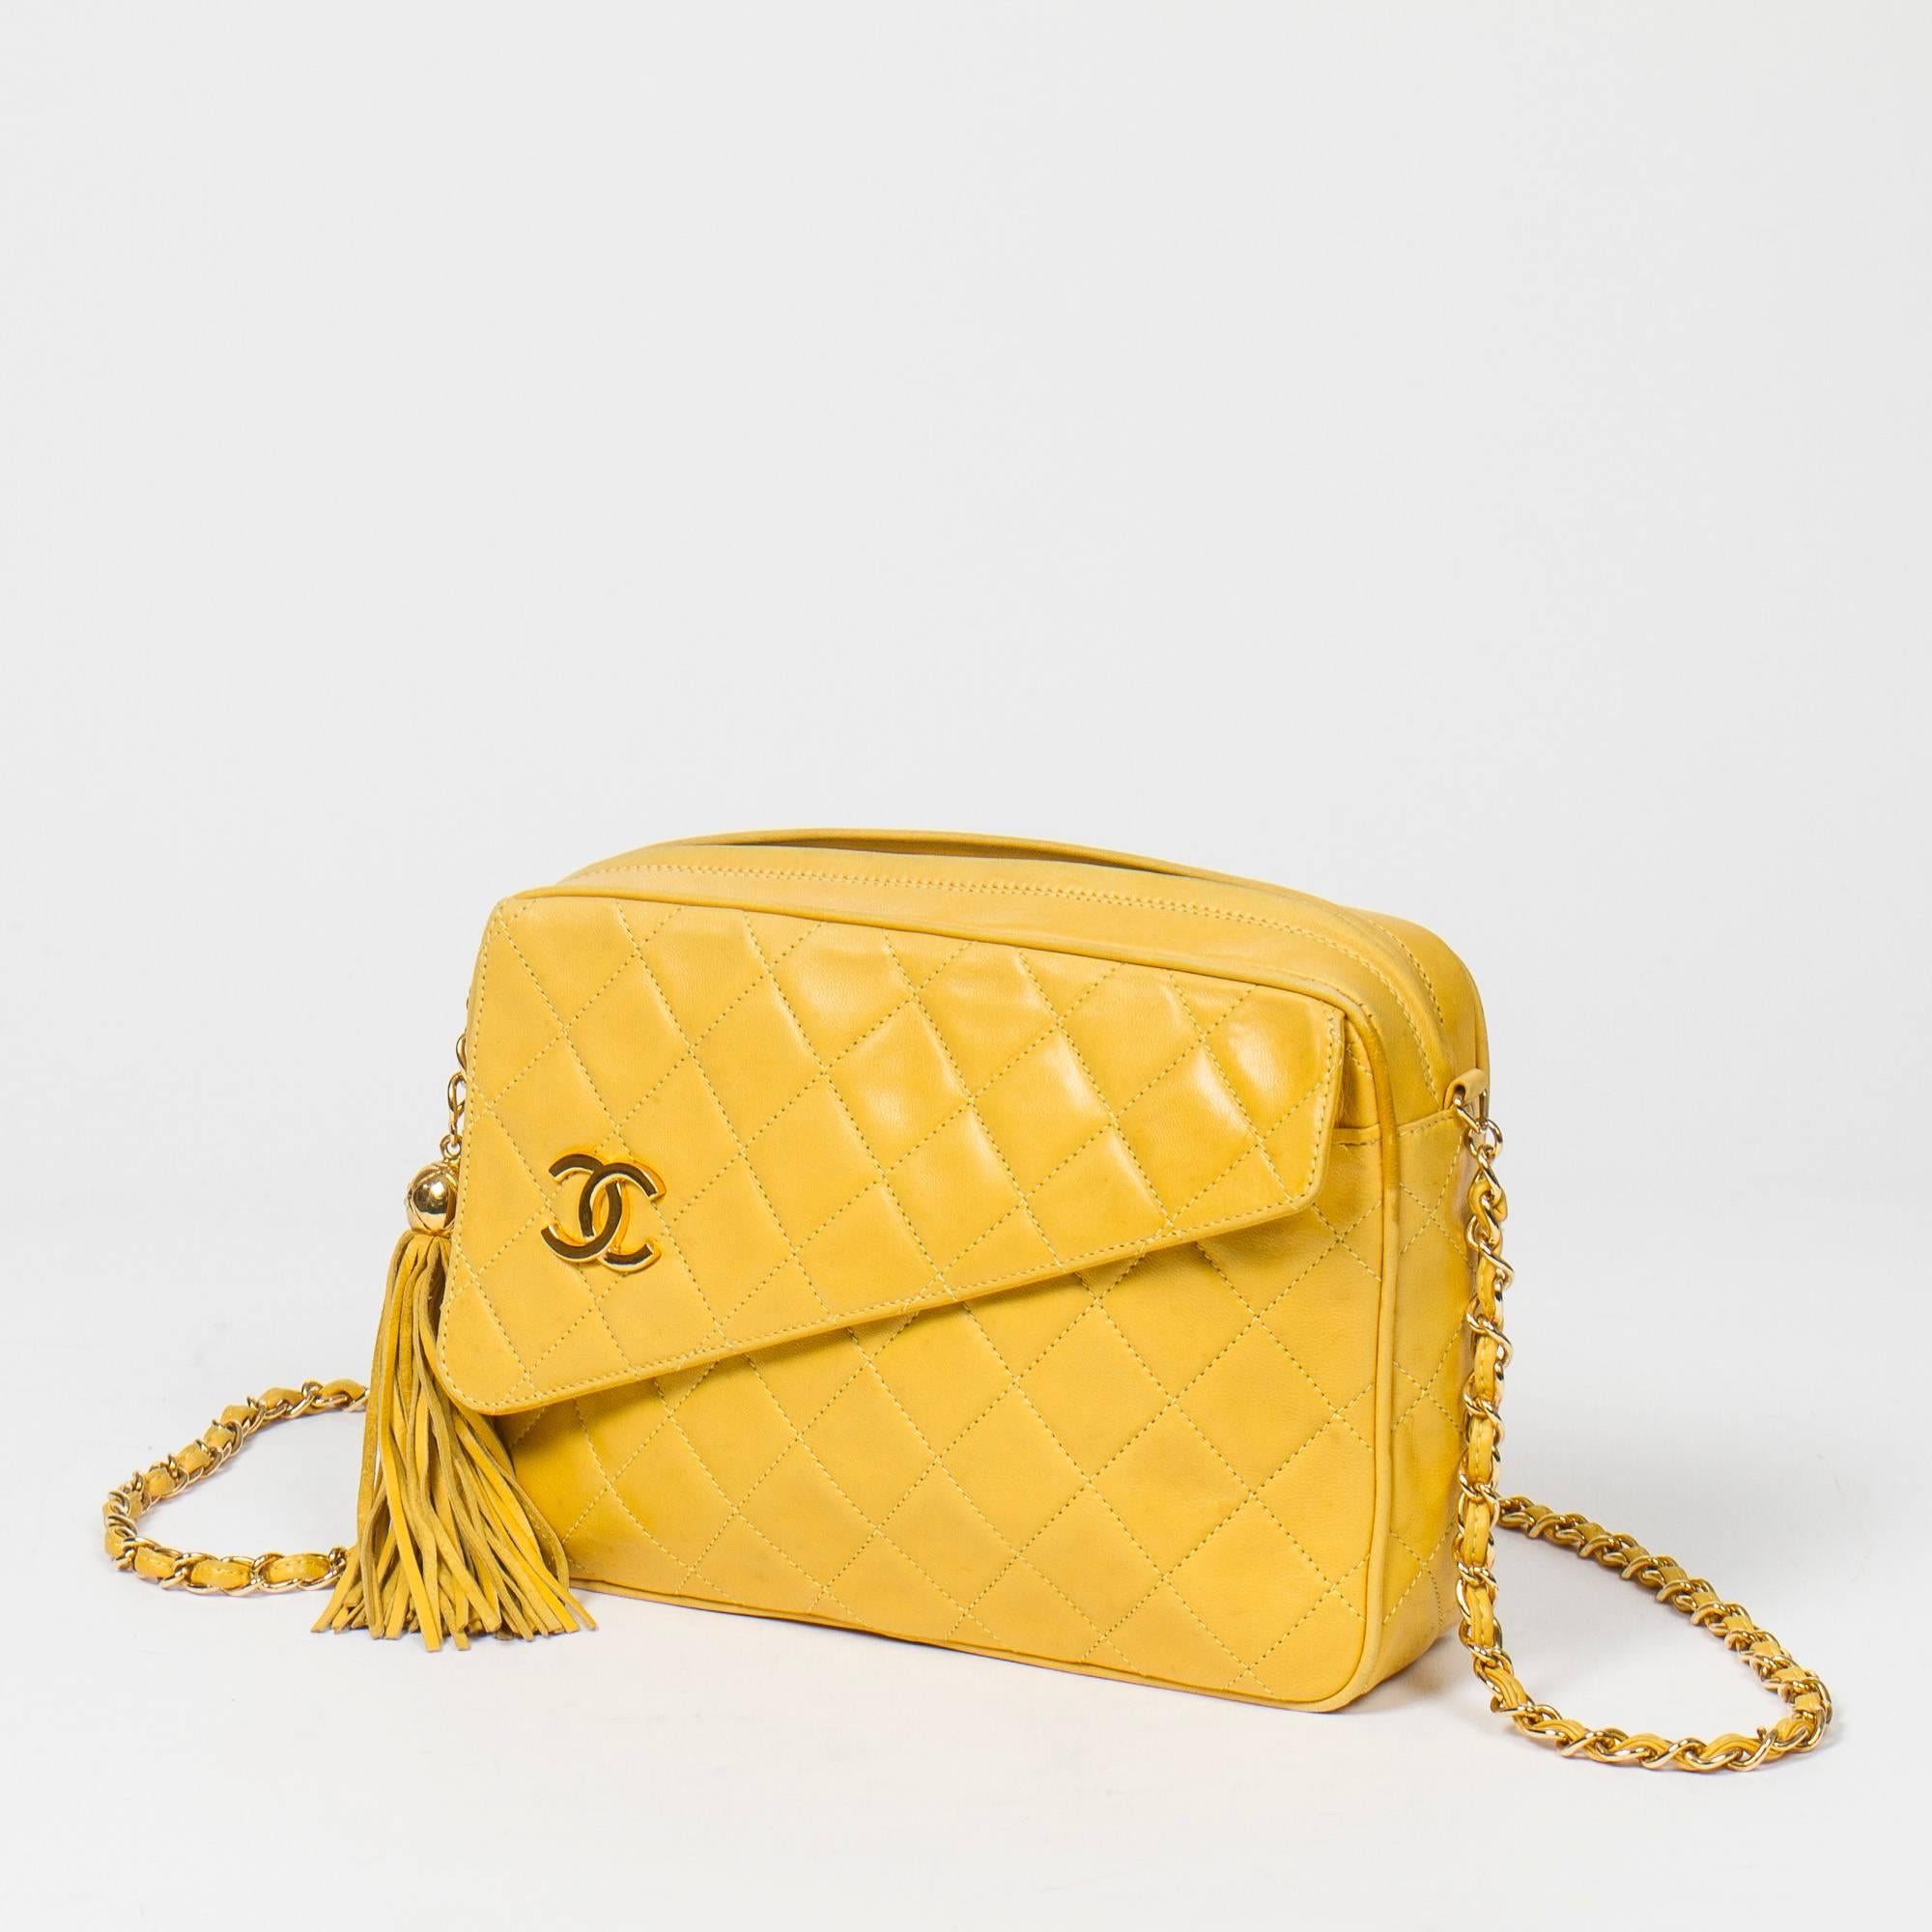 Vintage shoulder bag in yellow leather with chain strap interlaced with leather, front pocket with CC and magnetic closure on flap. Zip closure with leather tassel zipper toggle. Black leather interior with one slip pocket and one zip pocket.